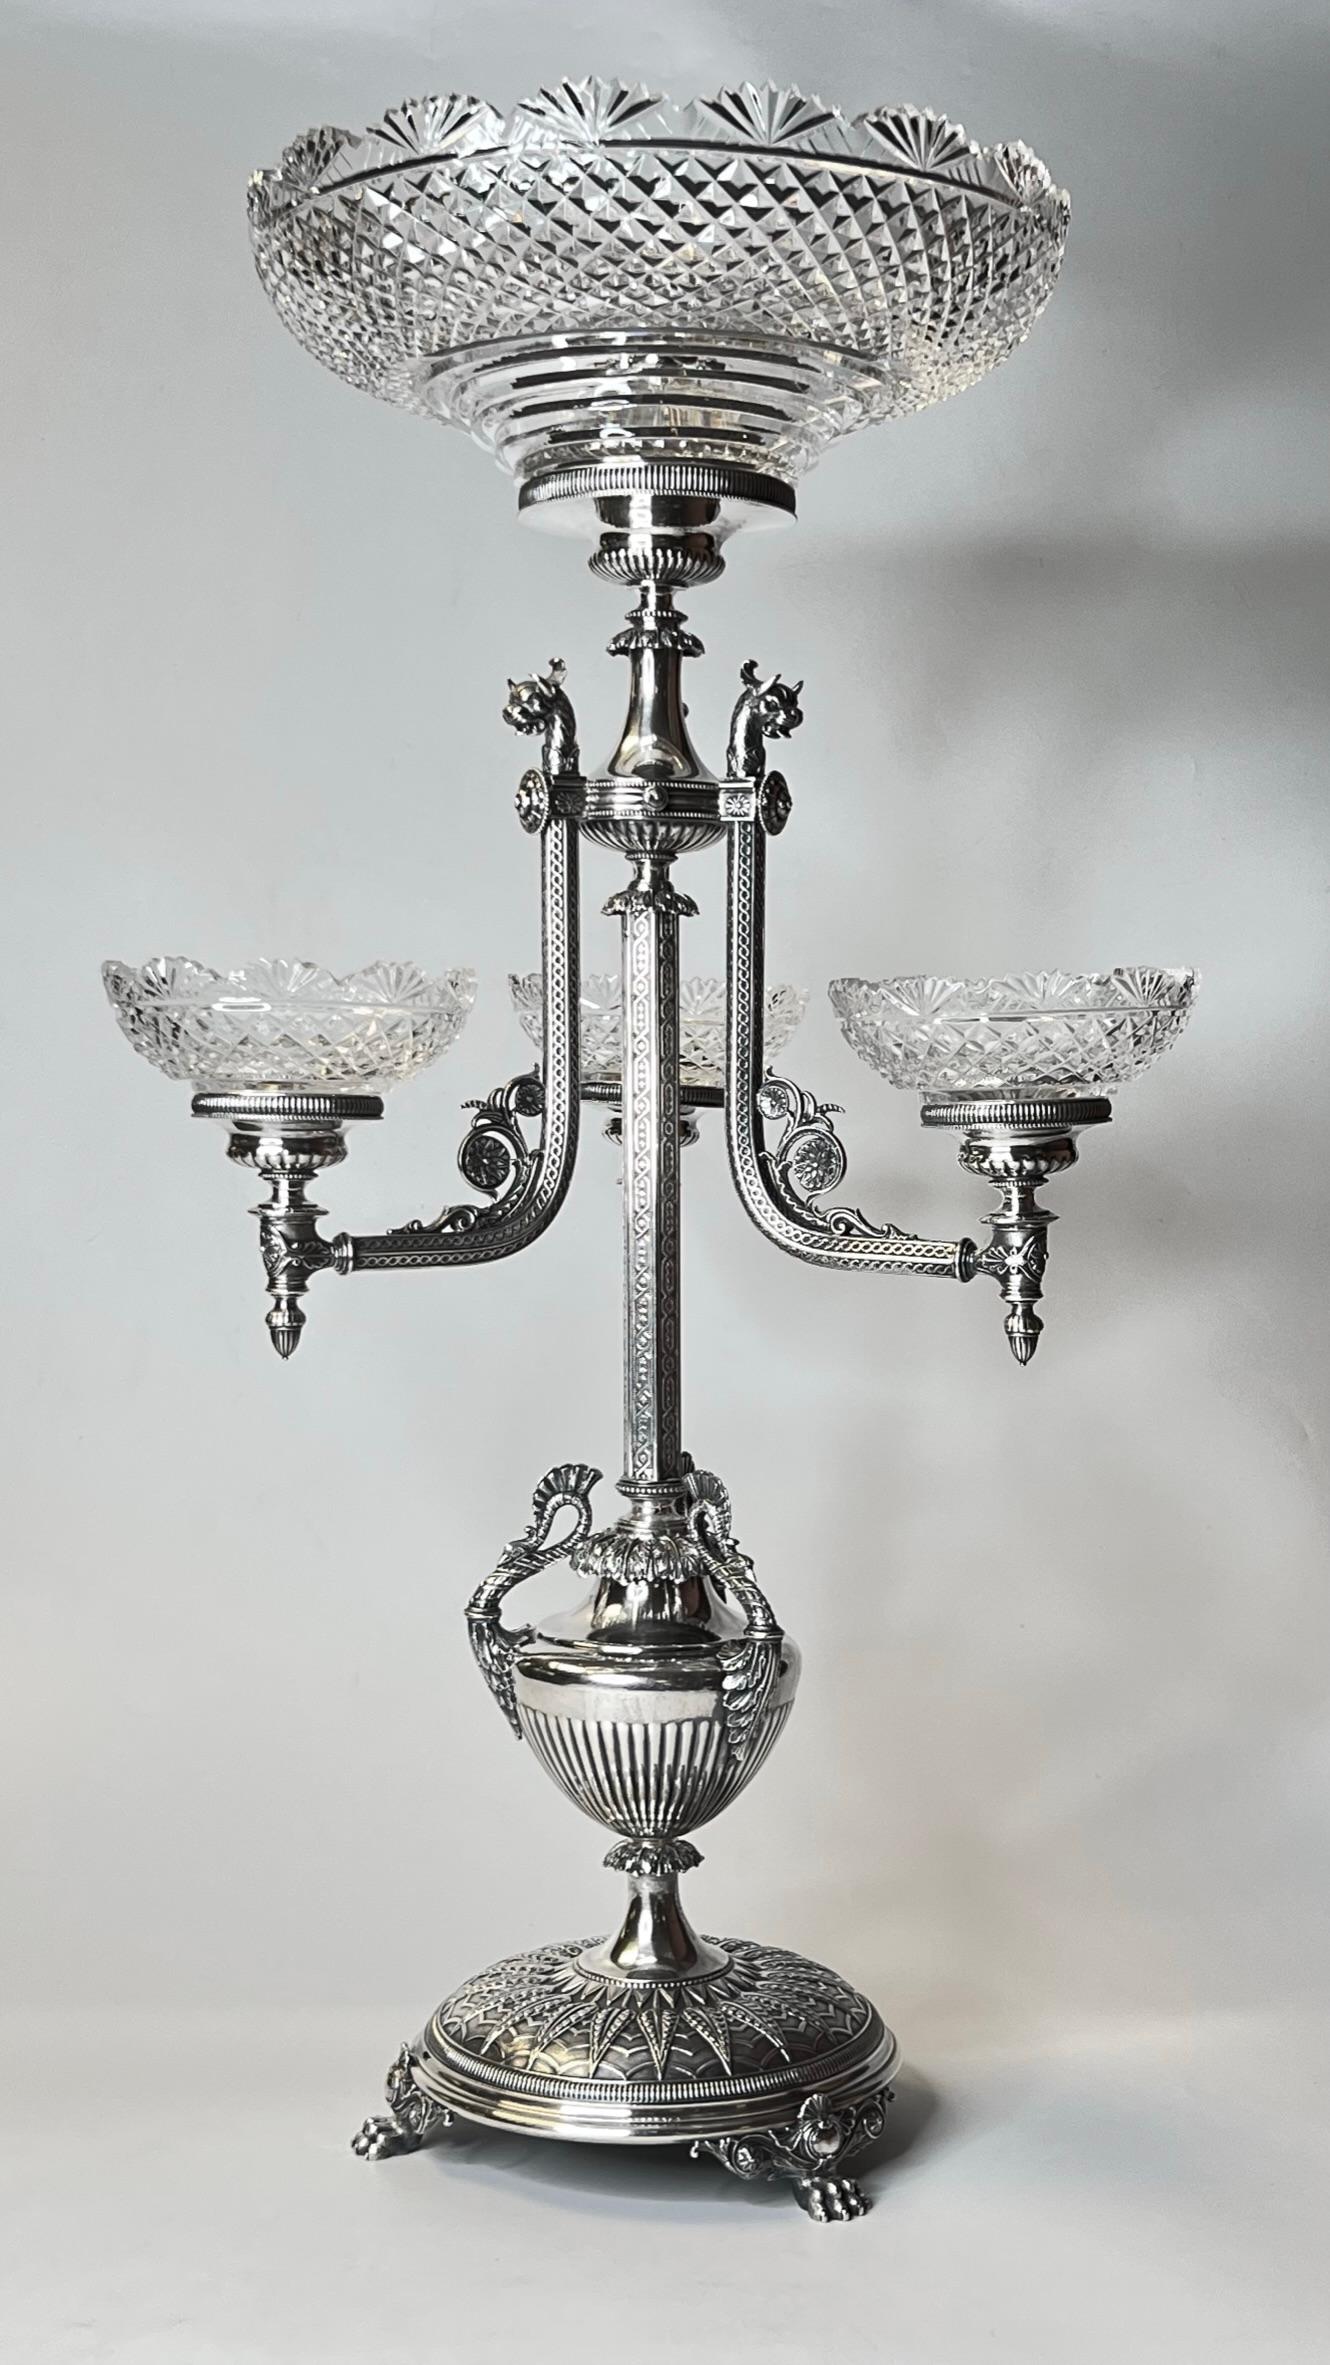 Our sterling silver epergne from the Bradford, England firm of Manoah Rhodes and Sons, circa 1888-1890, features wonderful neoclassical motifs including horned animals and exotic birds, a main dish of cut glass and three smaller matching cut glass